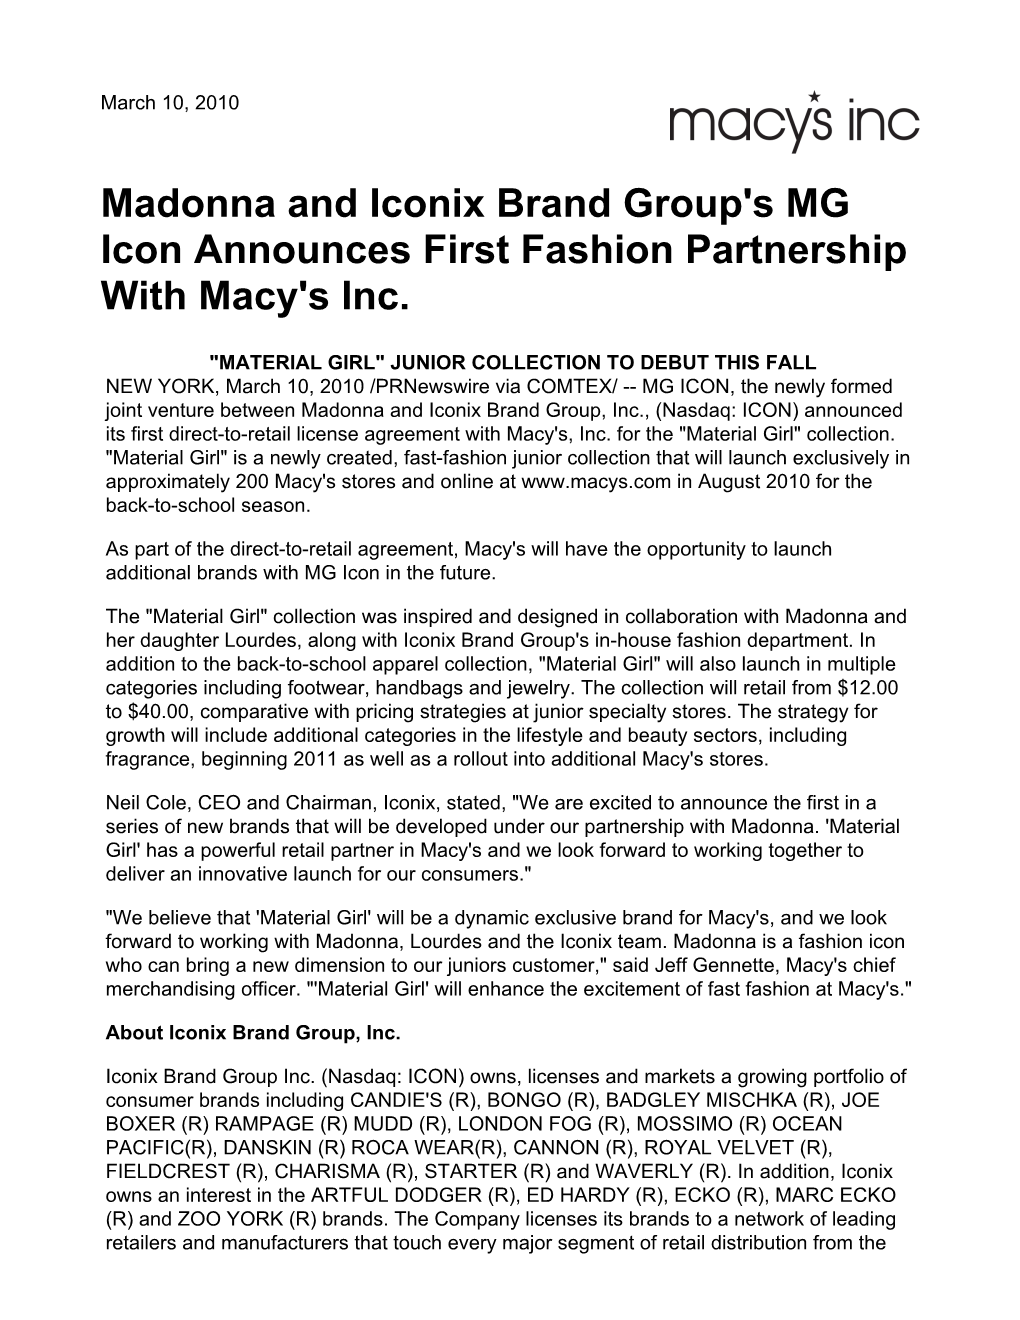 Madonna and Iconix Brand Group's MG Icon Announces First Fashion Partnership with Macy's Inc